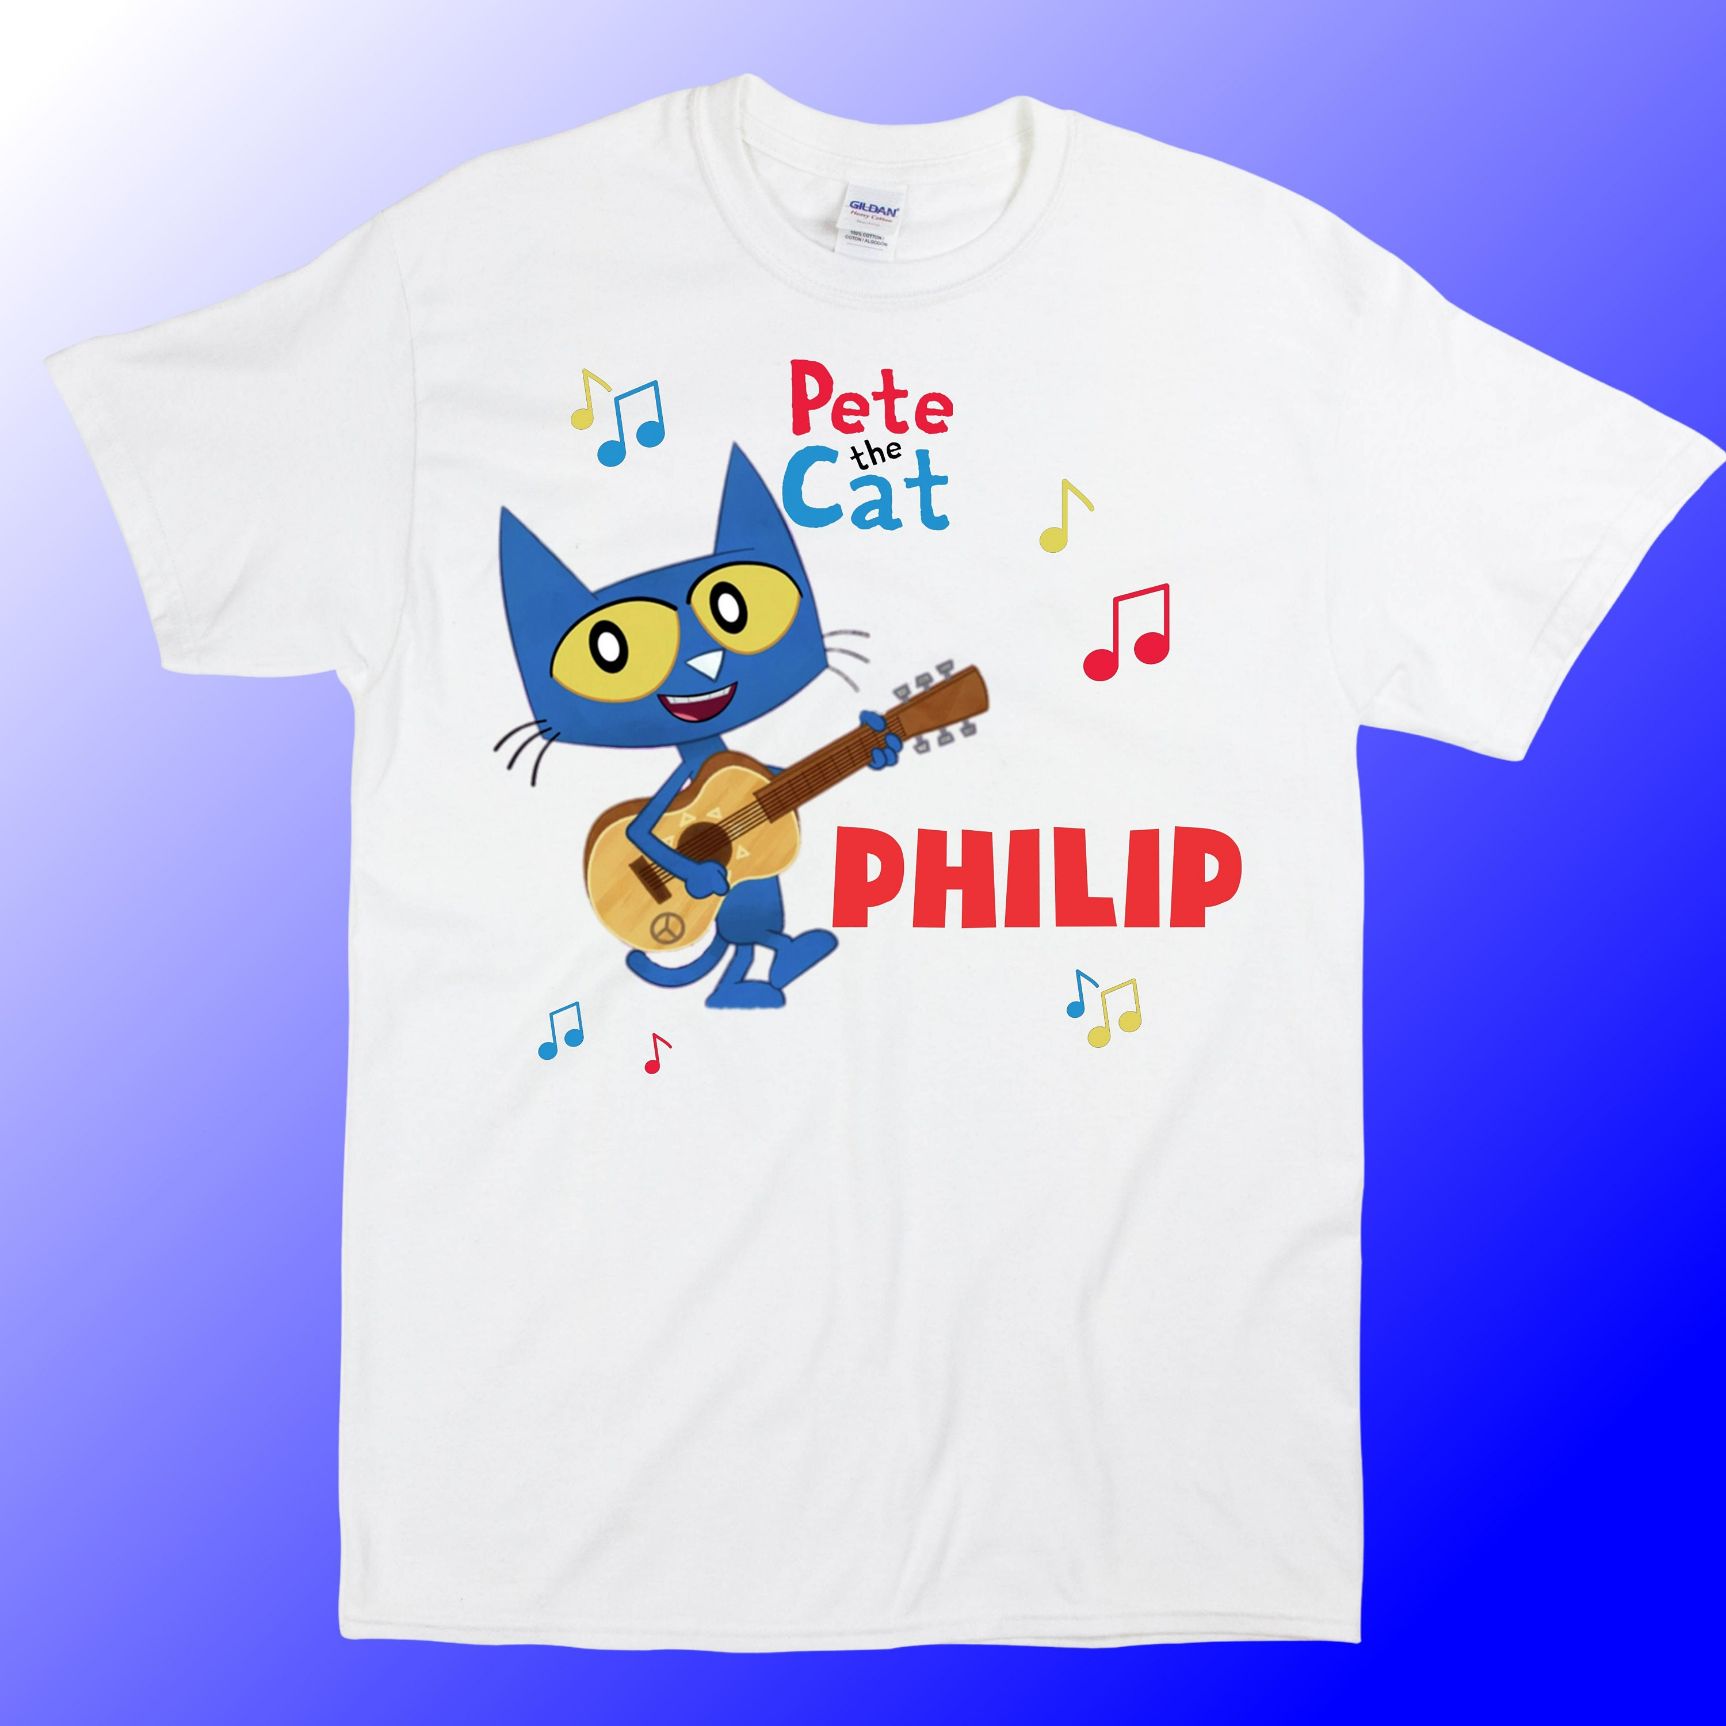 Pete The Cat  Inspired Shirt